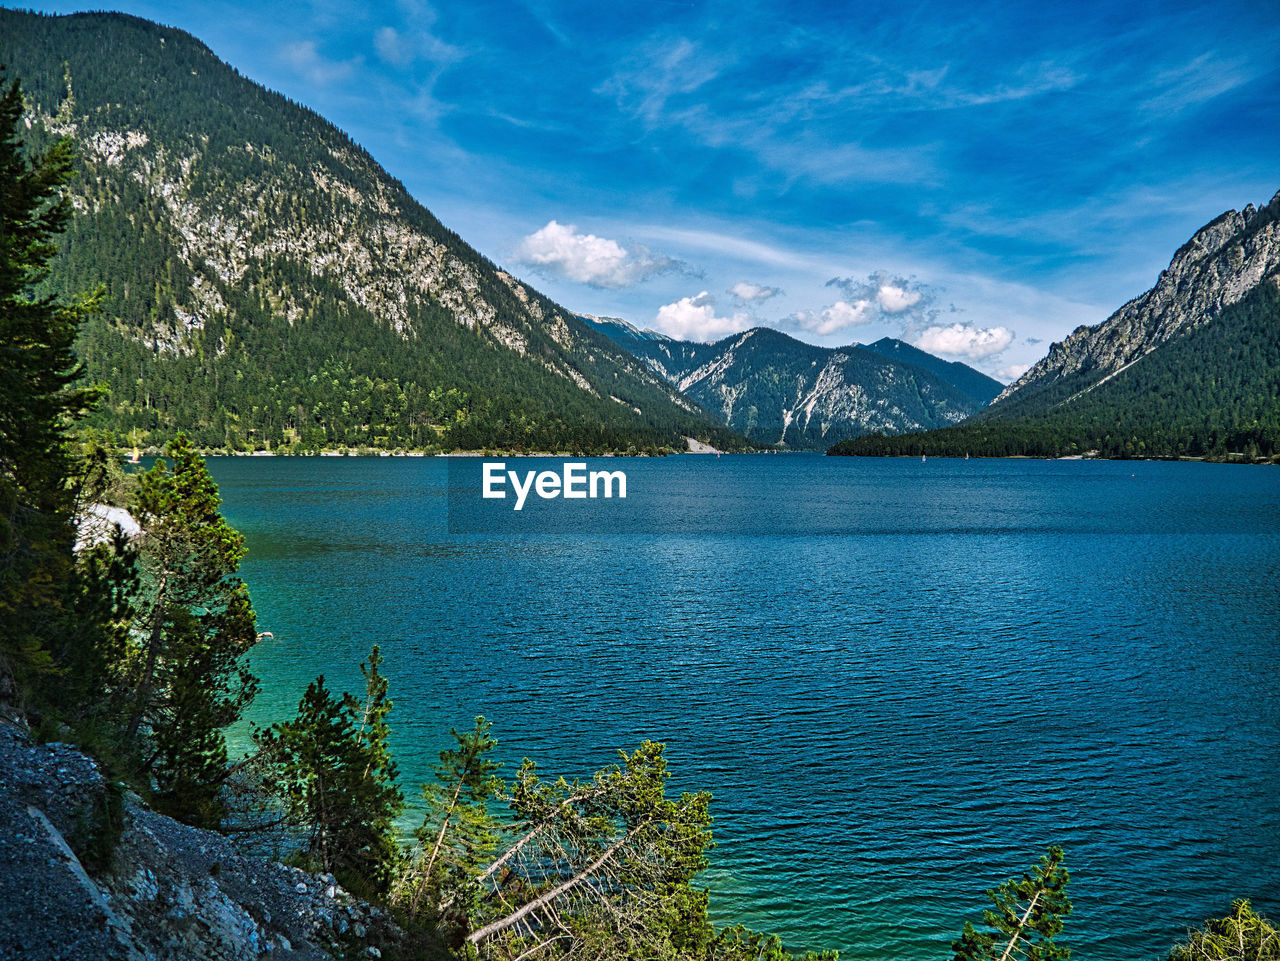 Scenic view of lake by mountains against blue sky